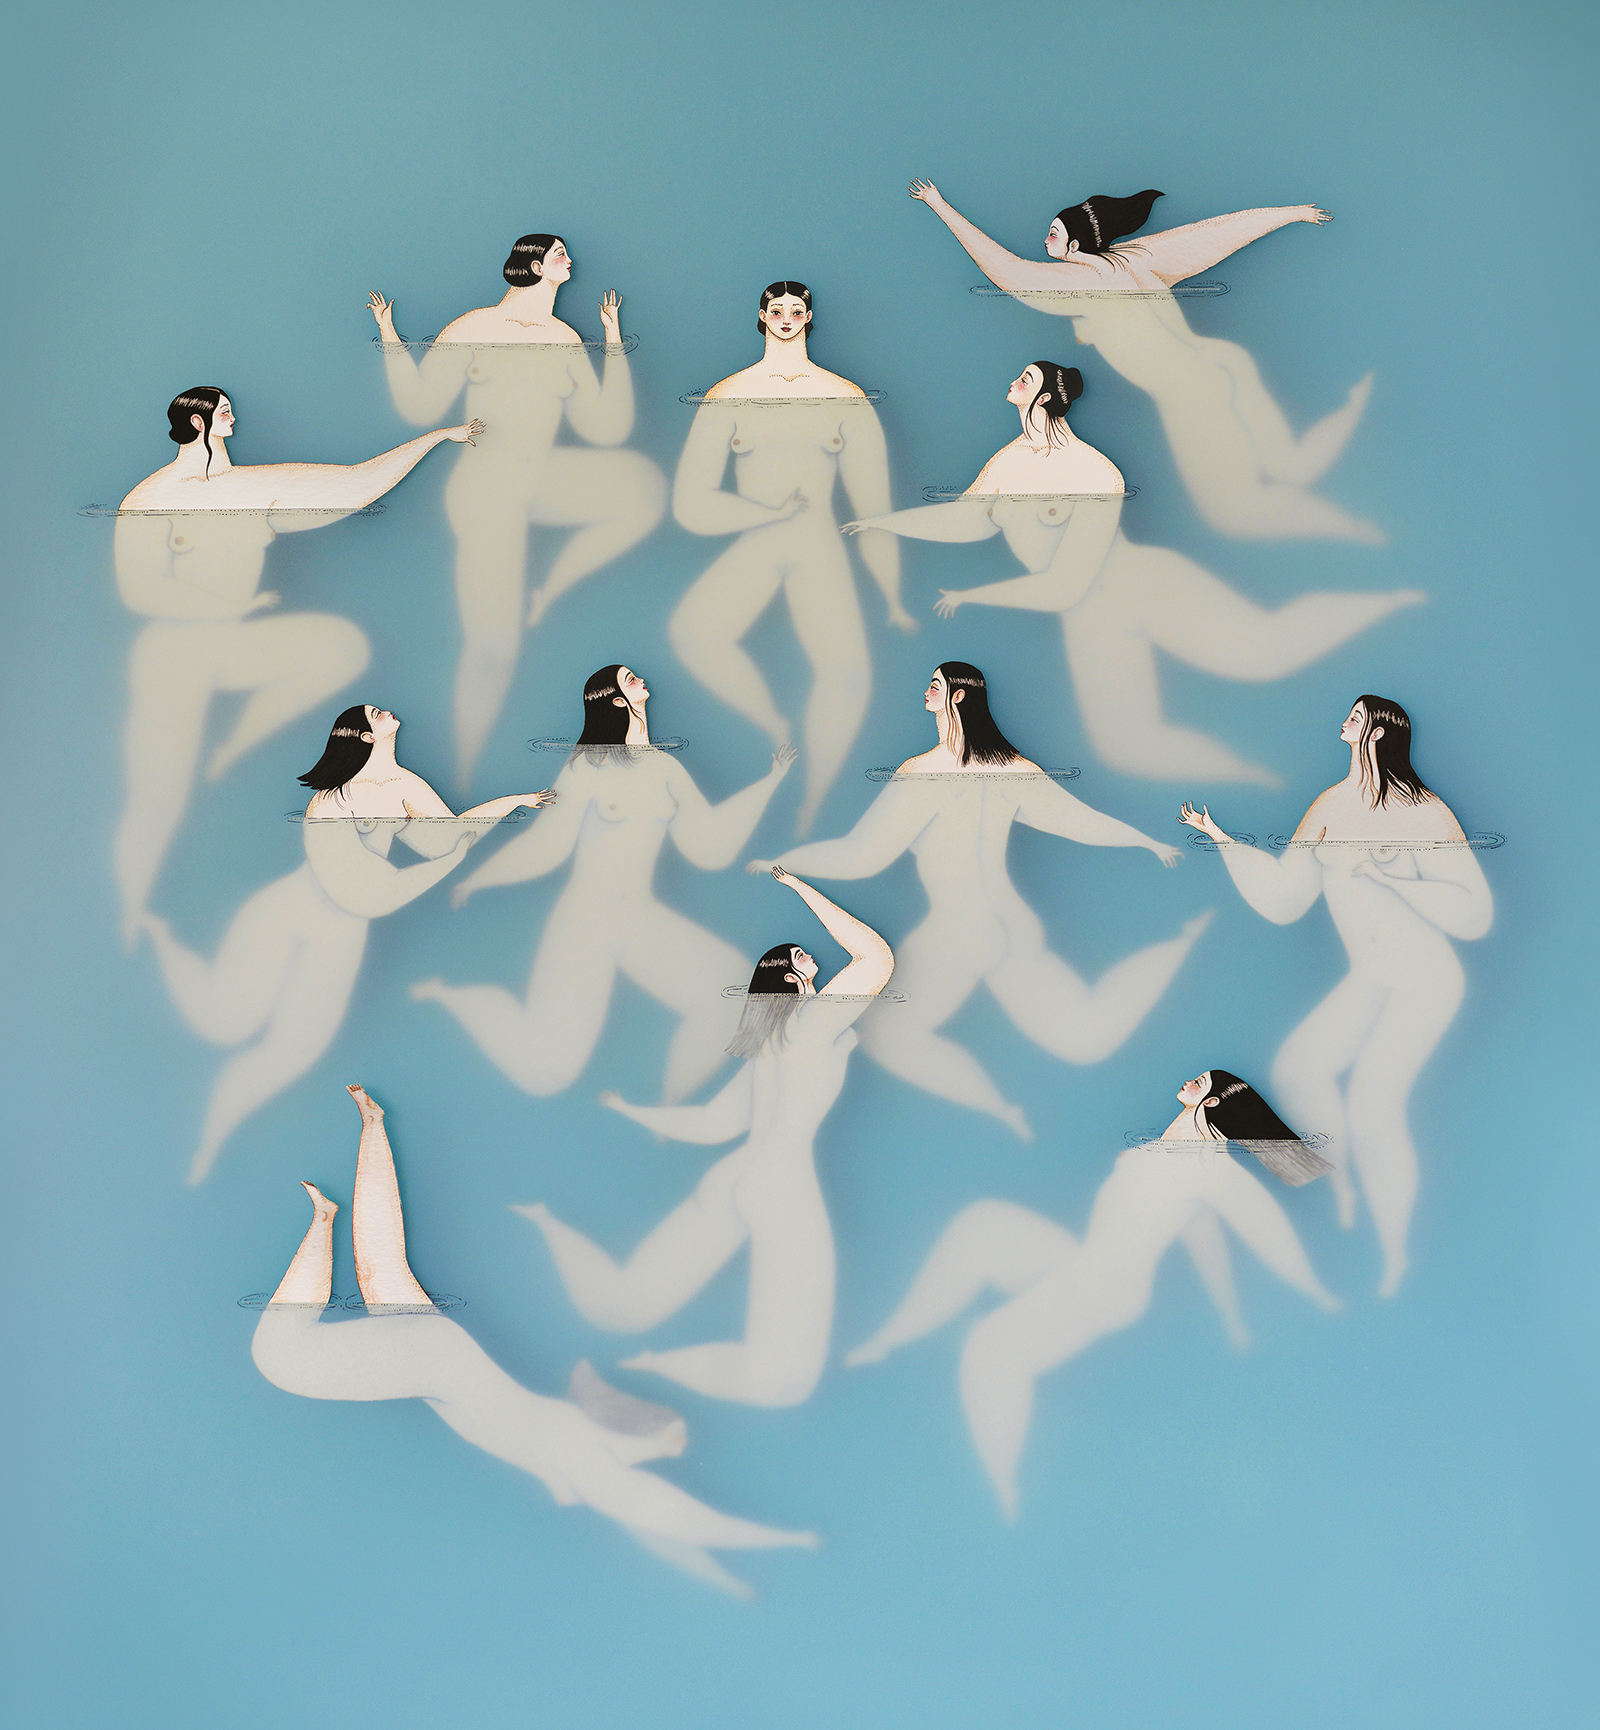 Japanese swimmers by Sonia Alins - Creative Work